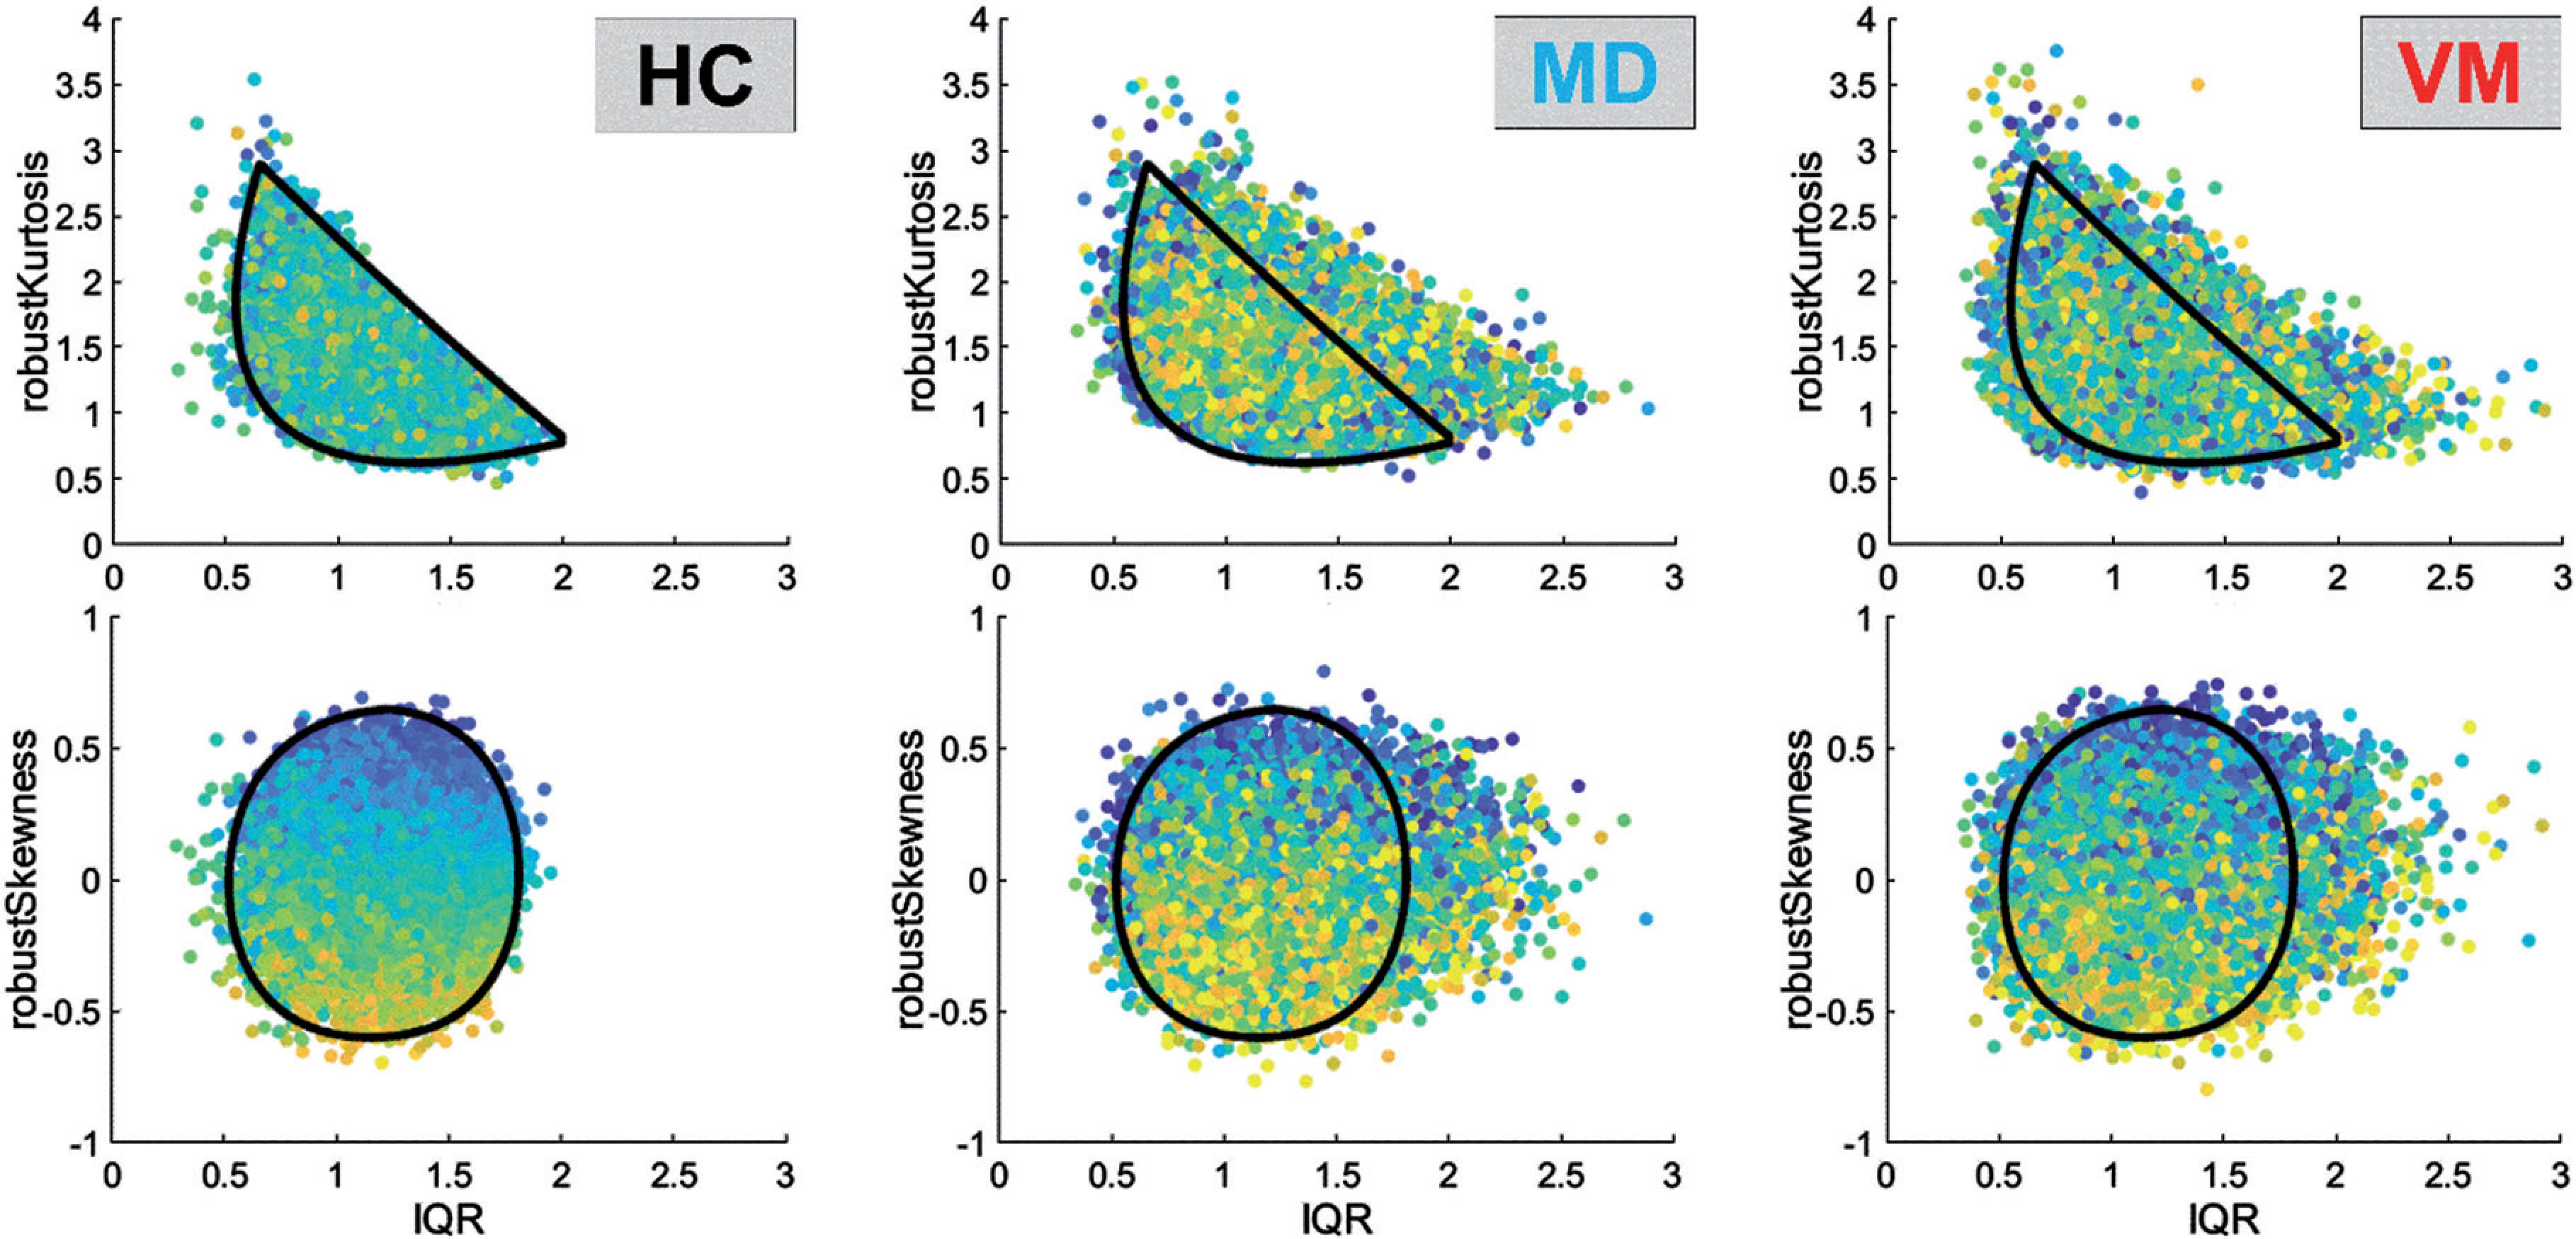 Distribution parameters per voxel relative to healthy control (HC) group. Values for healthy controls (HC) were marked with a black line 
and superimposed on Meniere disease (MD) and vestibular migraine (VM) group data. Color of dots indicates the median relative to the 
HC group (blue to yellow). The data of the healthy controls was normalized to mean of 0 and standard deviation 1, and these parameters 
were used to normalize the MD and VM patients, i.e., everything is presented in the scale of the HC group such that parameters can be 
compared visually.